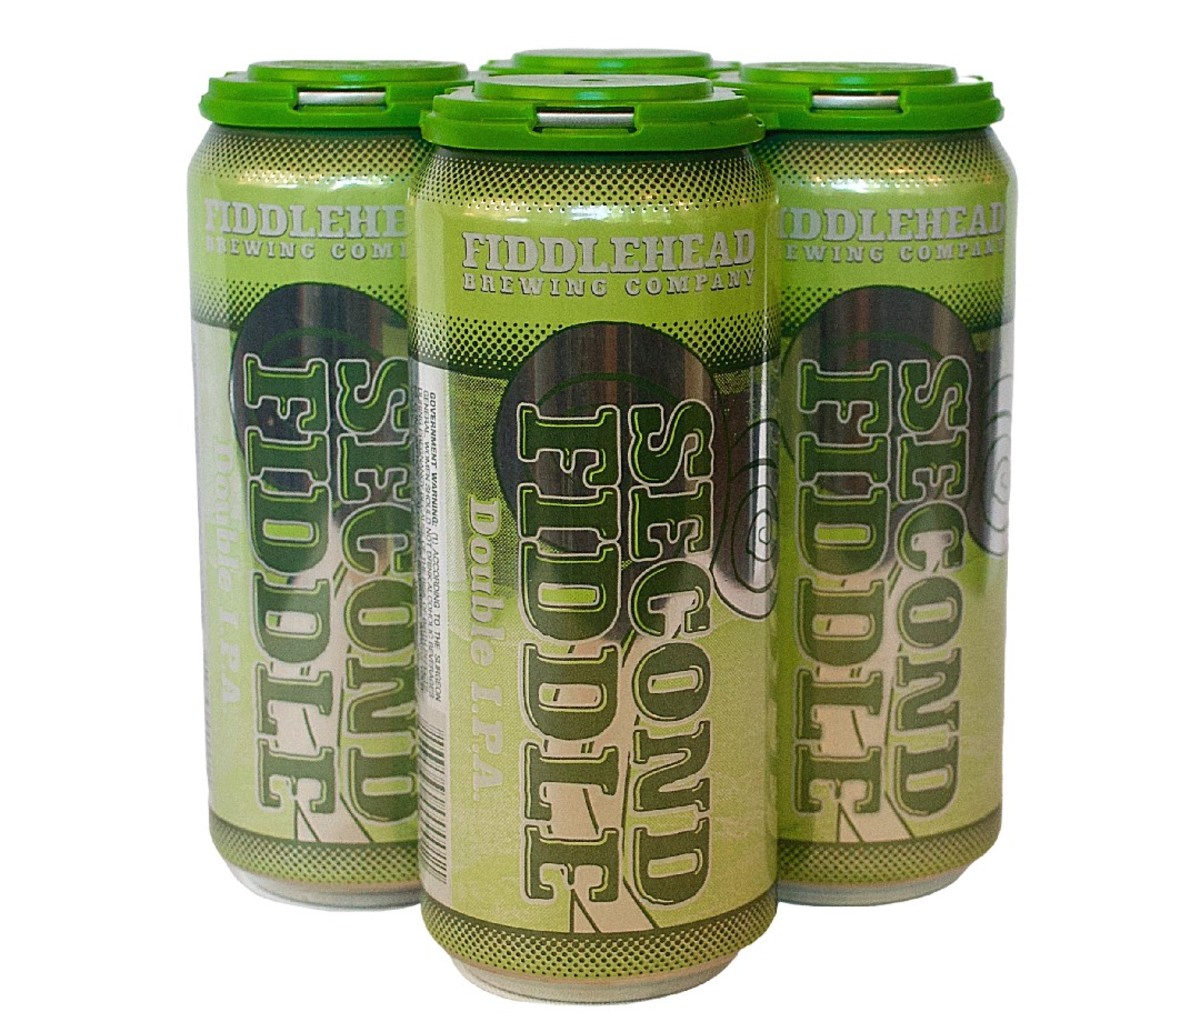 Four cans of Fiddlehead Second Fiddle double IPA beer